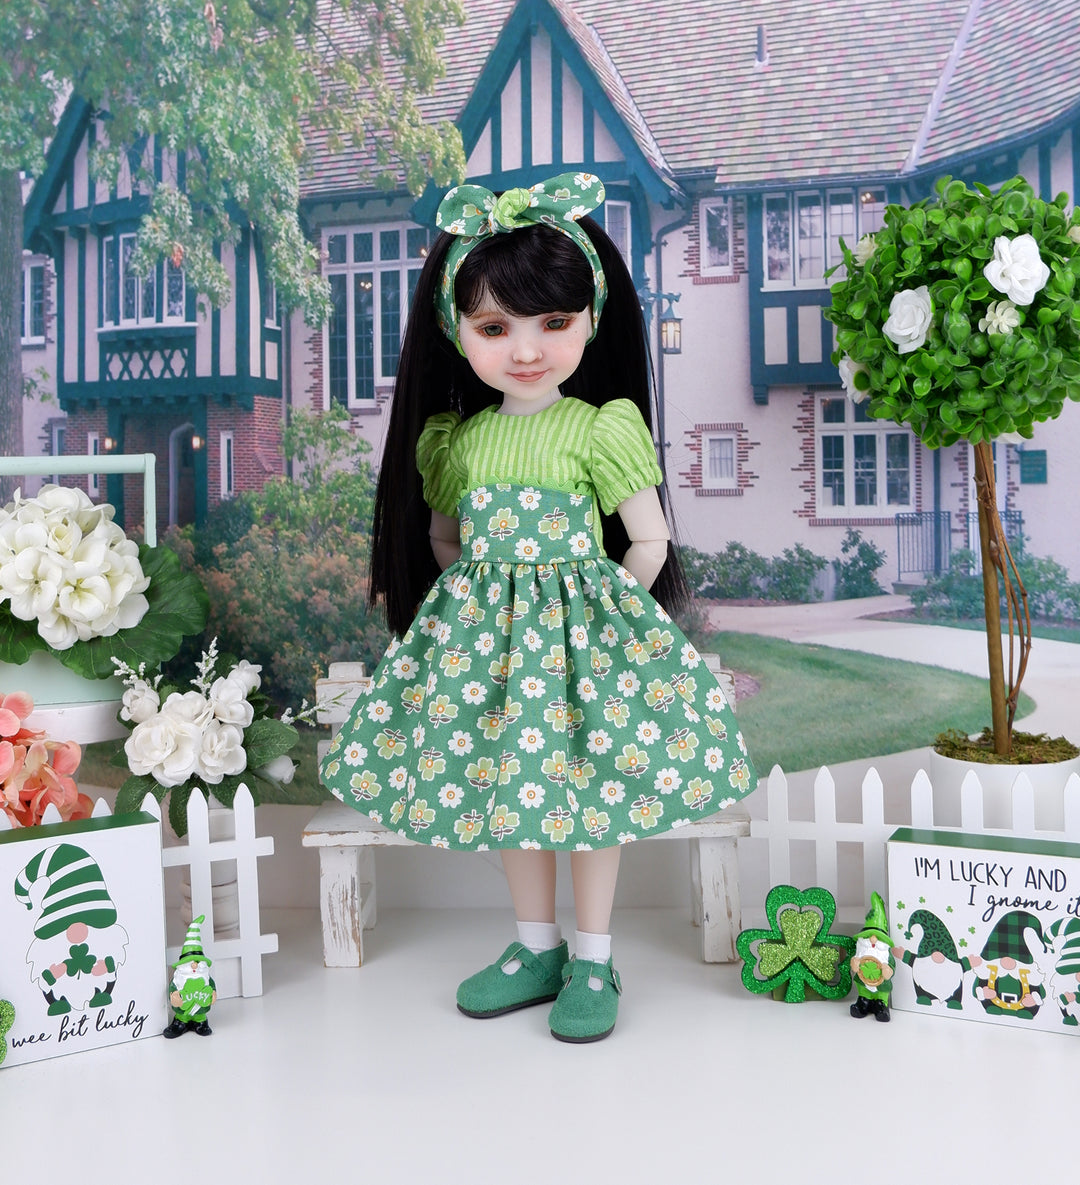 Vintage Shamrock - dress and shoes for Ruby Red Fashion Friends doll